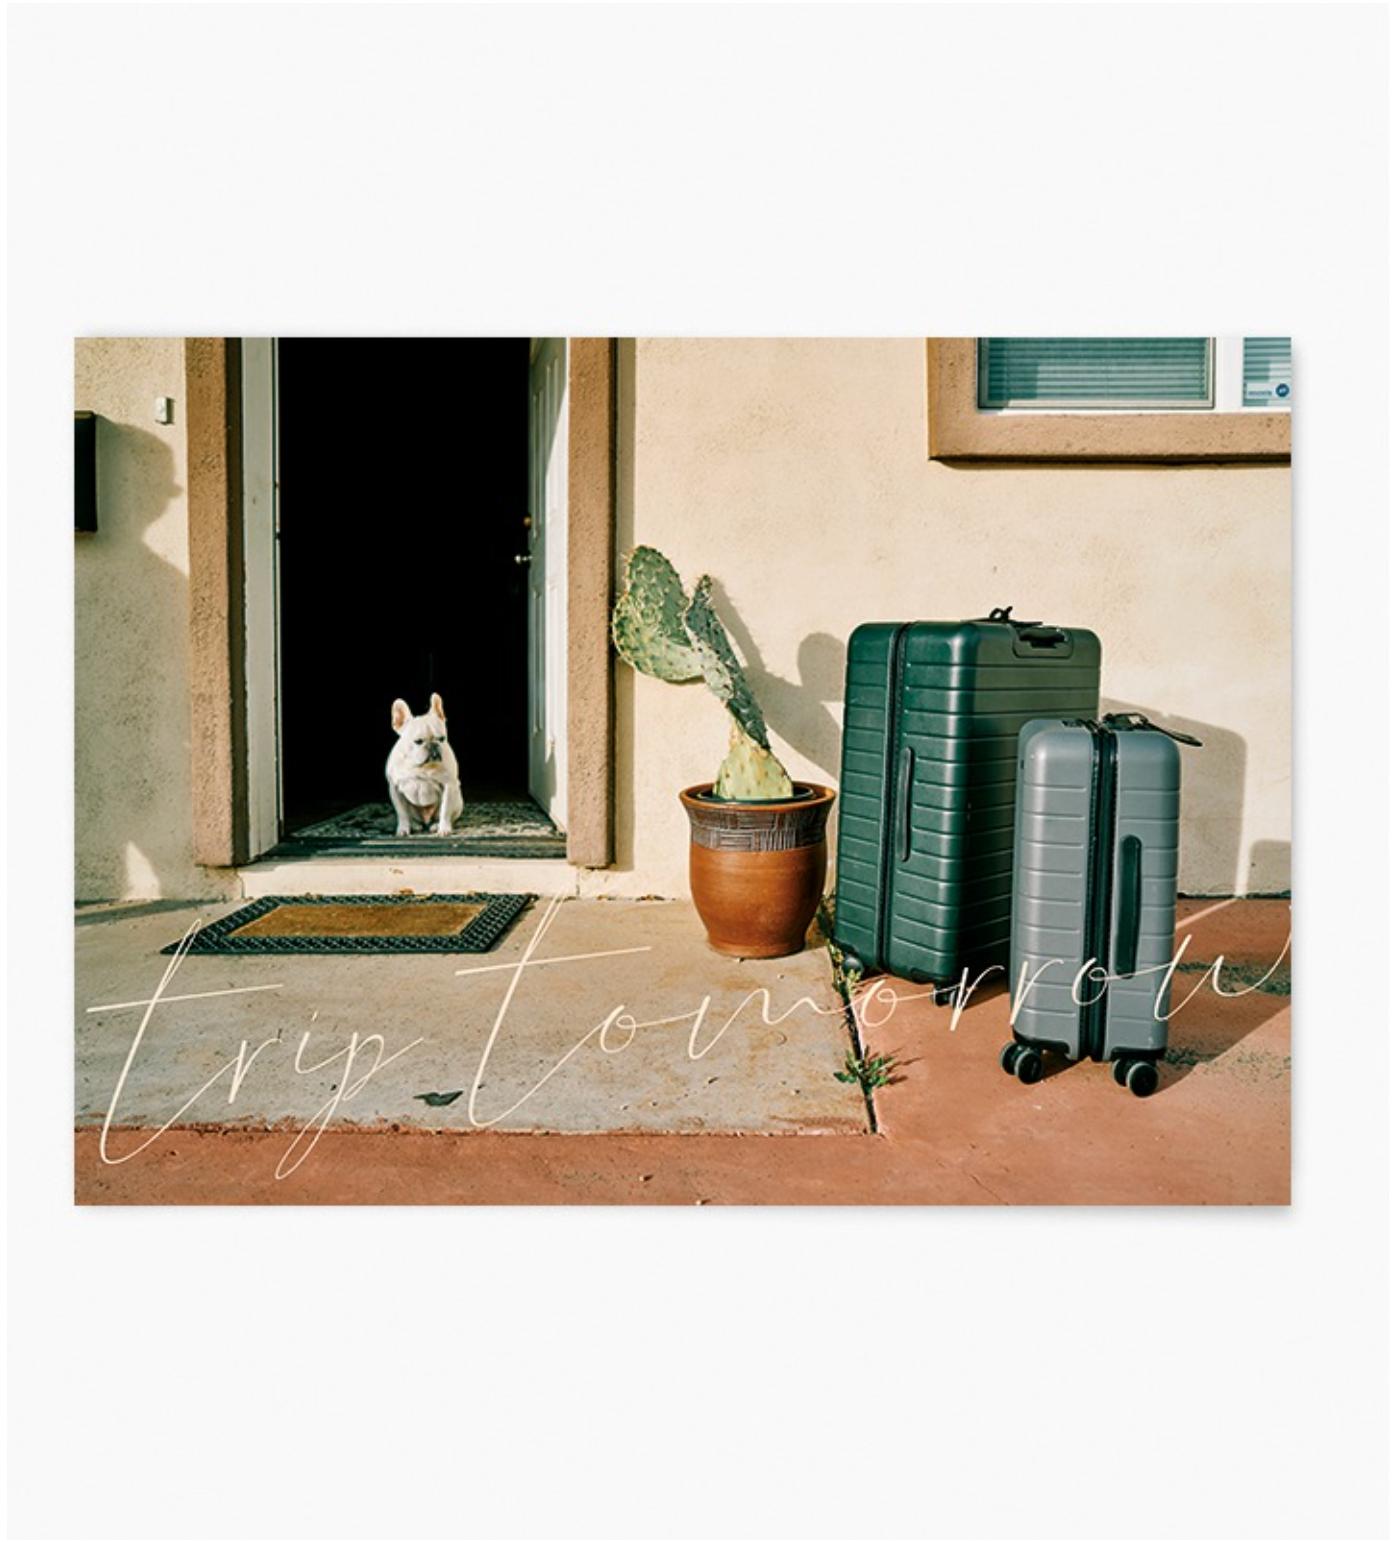 a dog and luggage | wall art